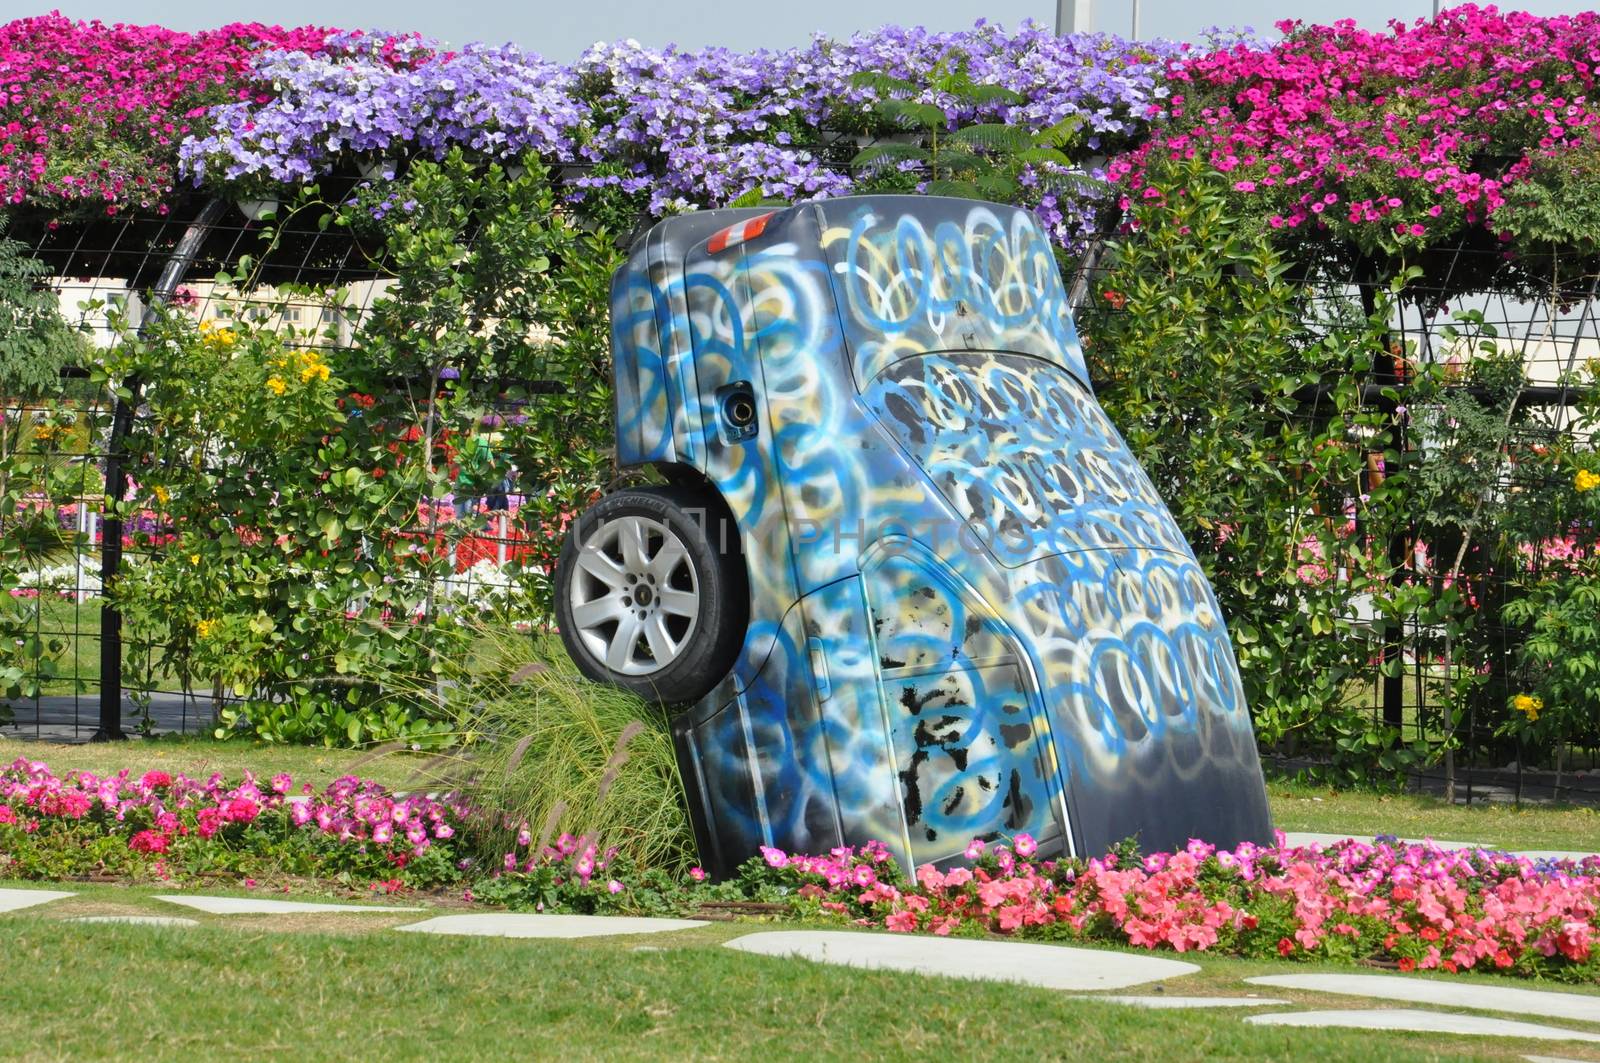 Dubai Miracle Garden in the UAE. It has over 45 million flowers.